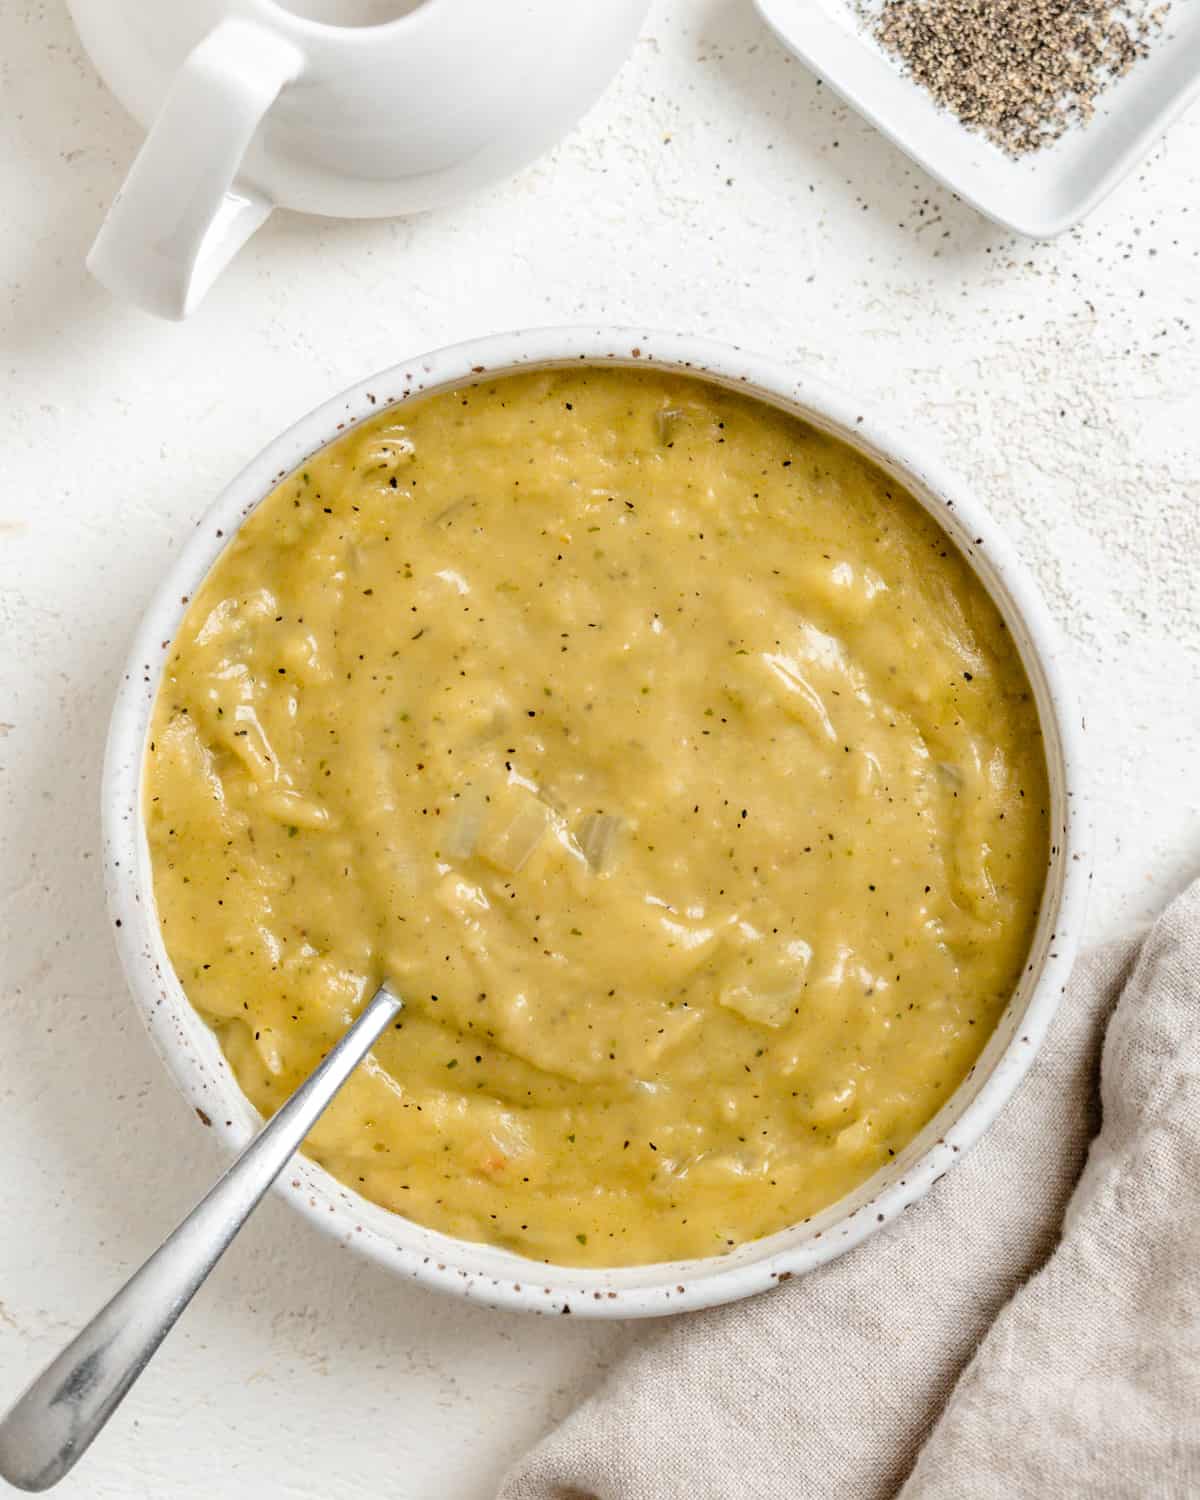 completed Easy Vegan Gravy in a bowl against a light surface